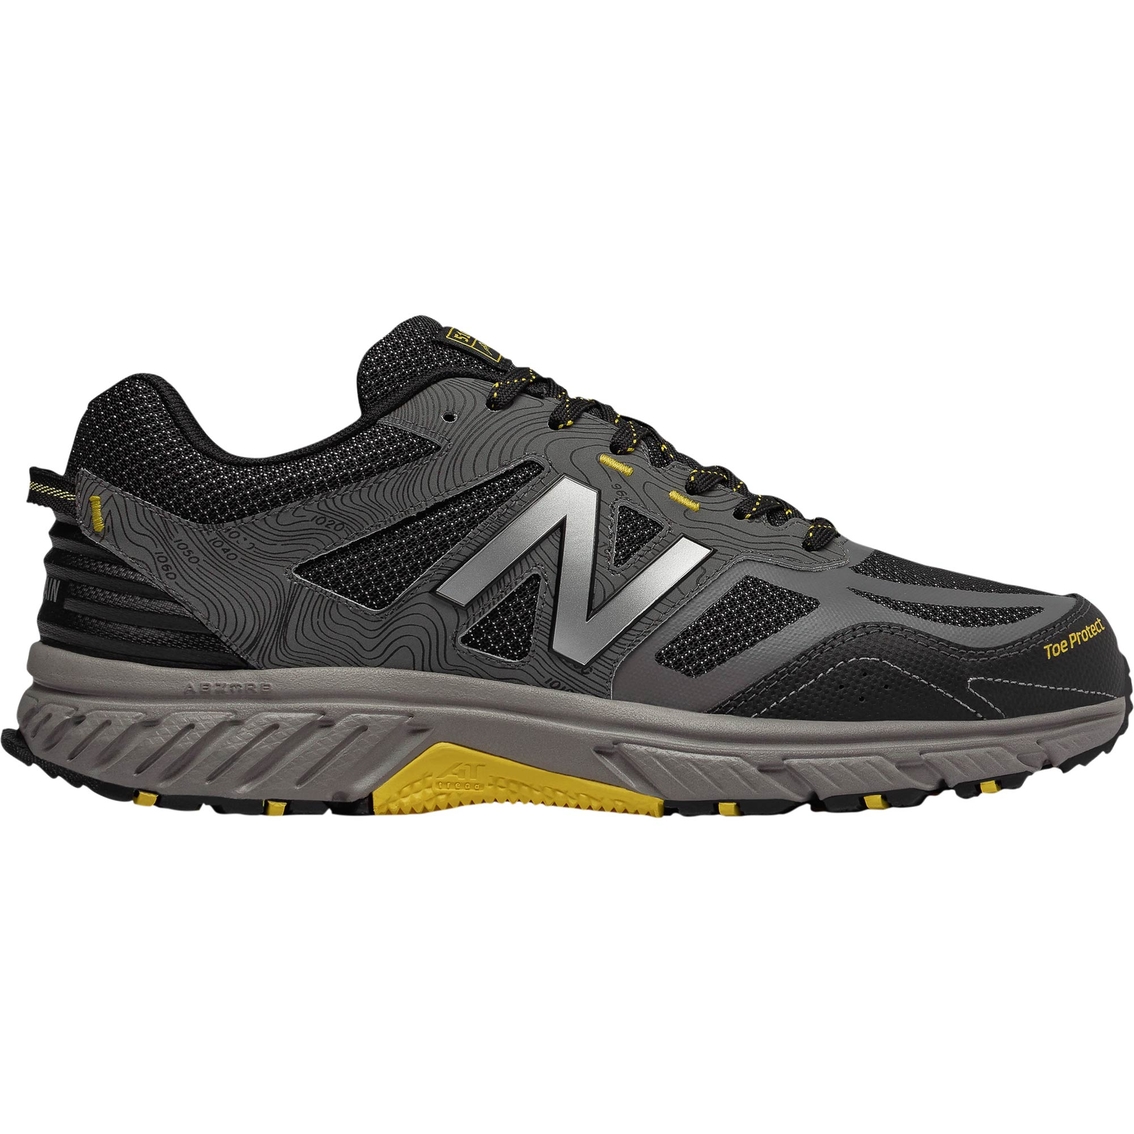 New Balance Men's Mt510lc4 Trail Running Shoes | Hiking \u0026 Trail | Shoes |  Shop The Exchange